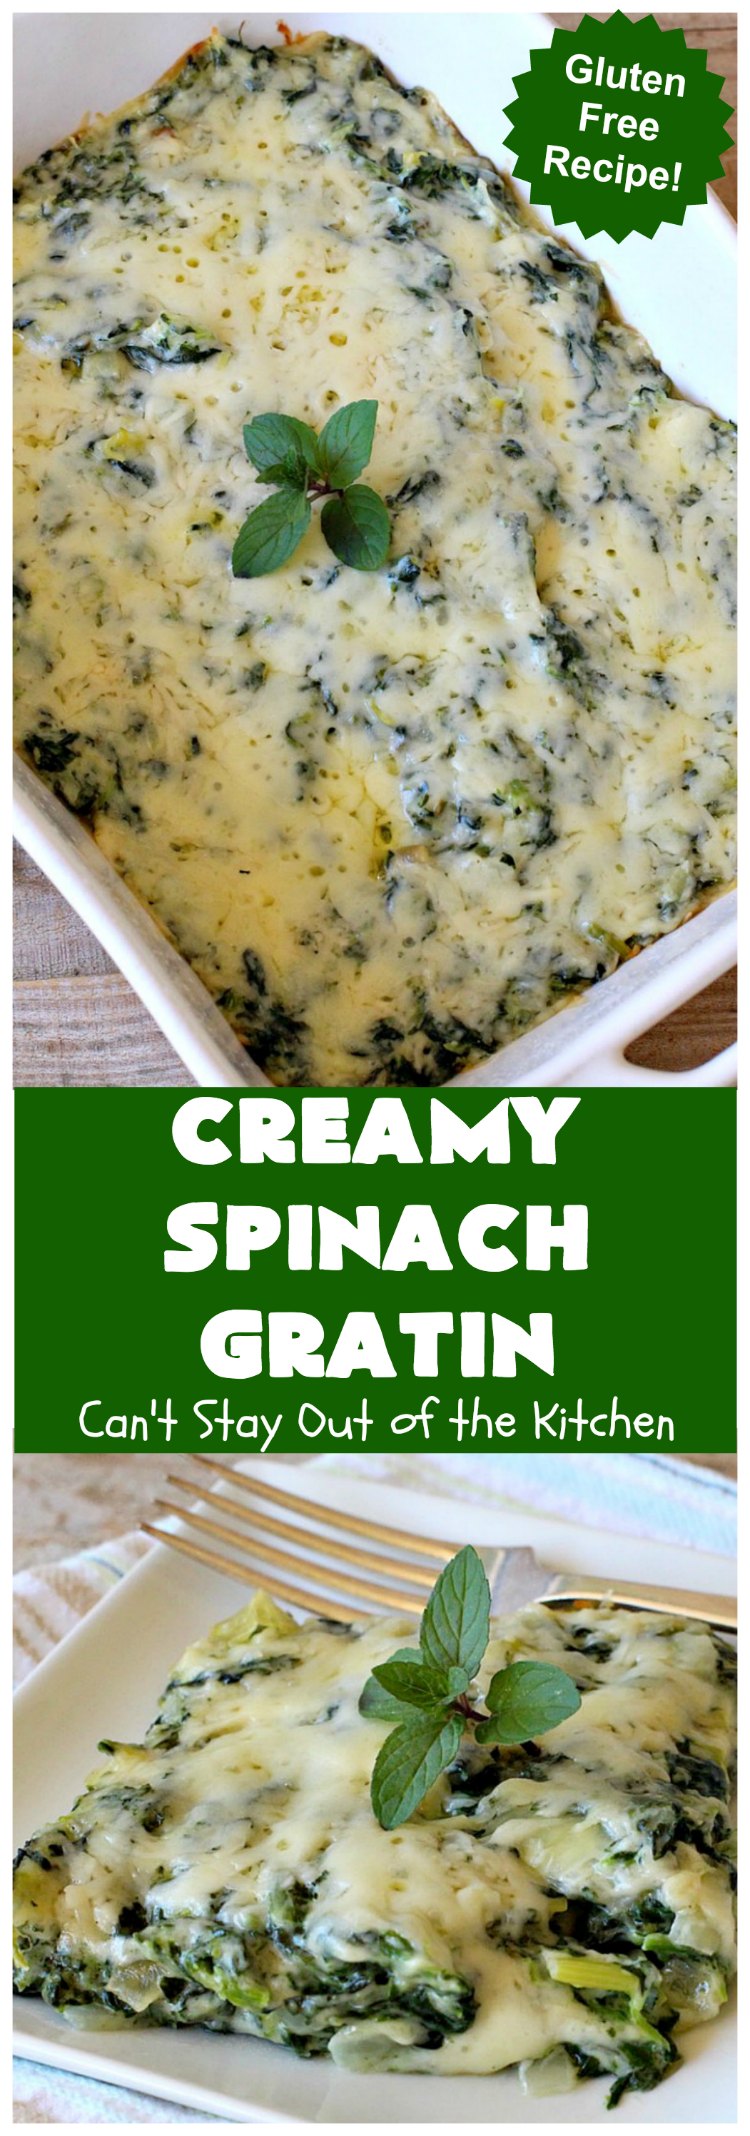 Creamy Spinach Gratin | Can't Stay Out of the Kitchen